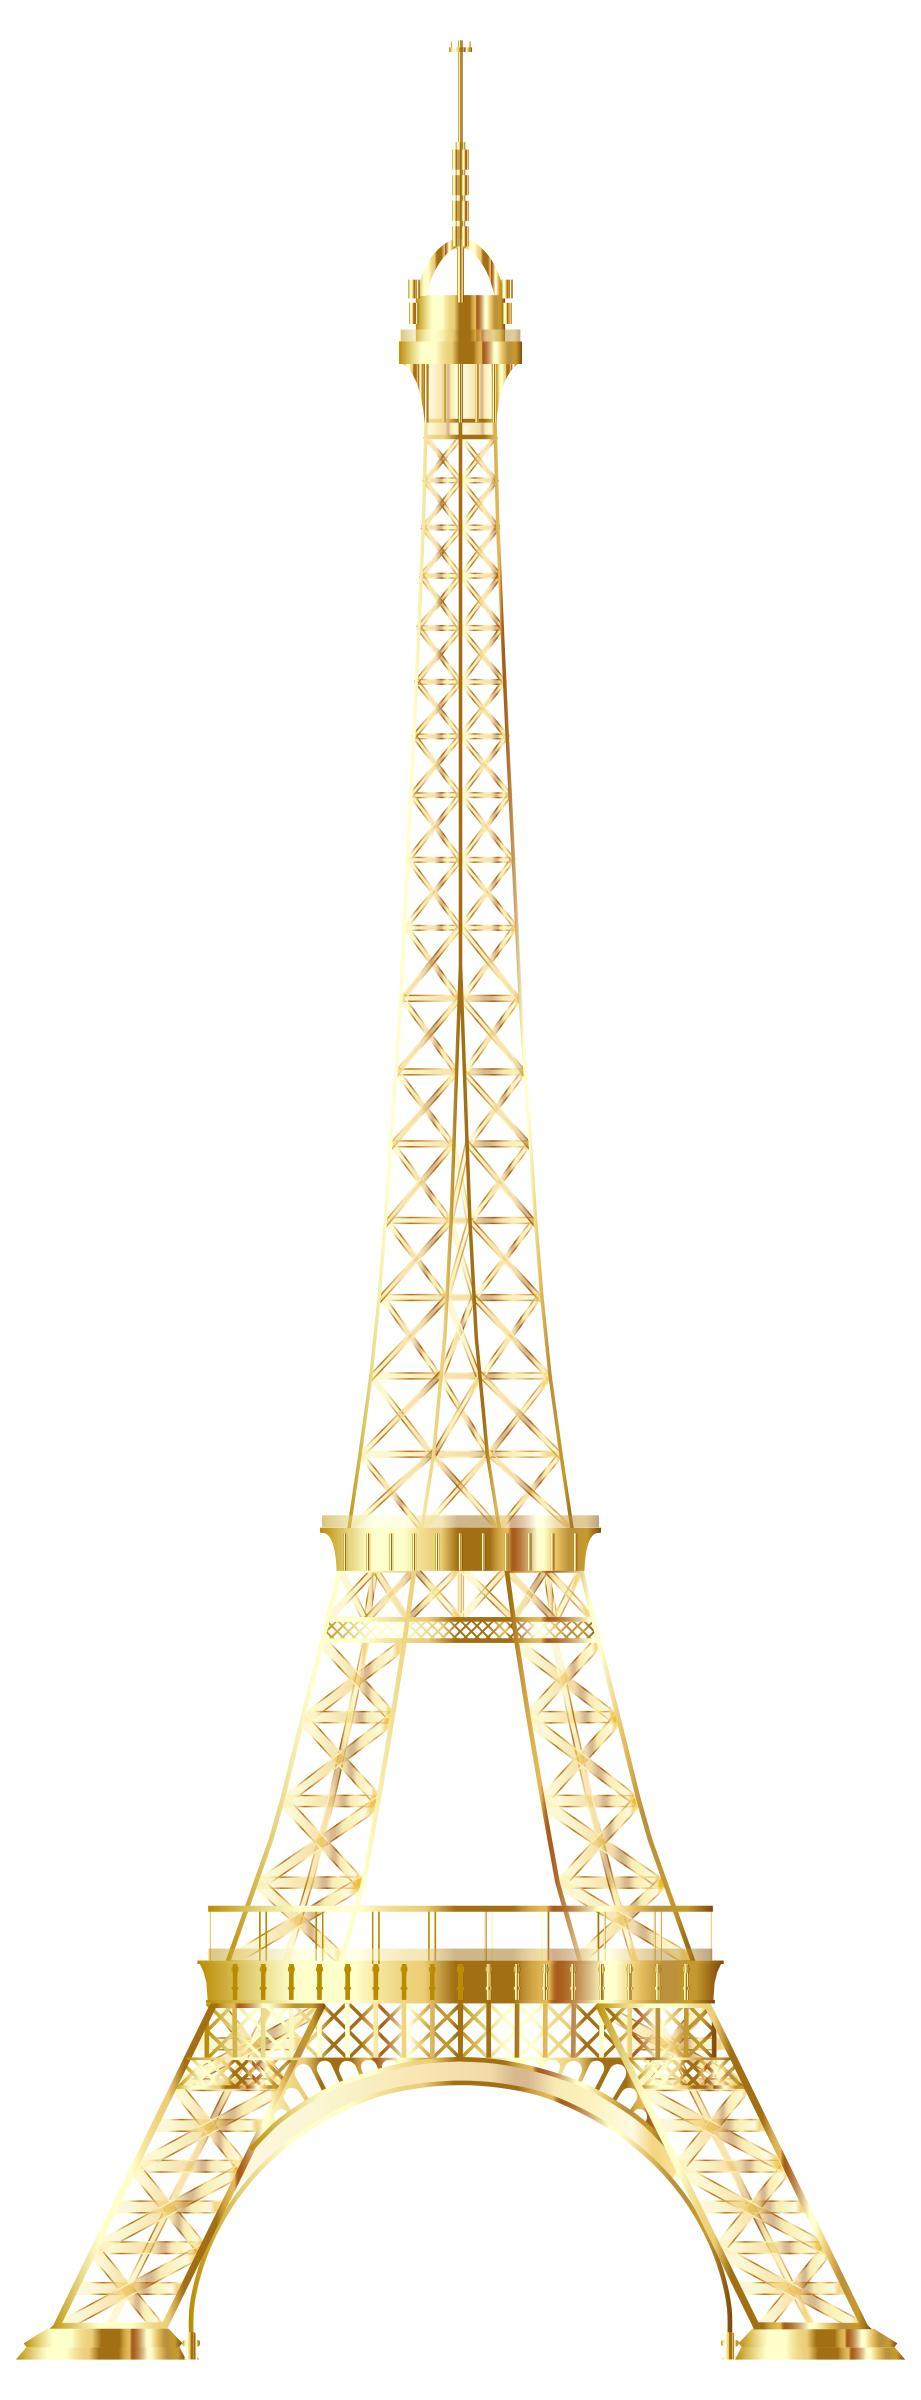 Eiffel Tower Gold No Background png transparent